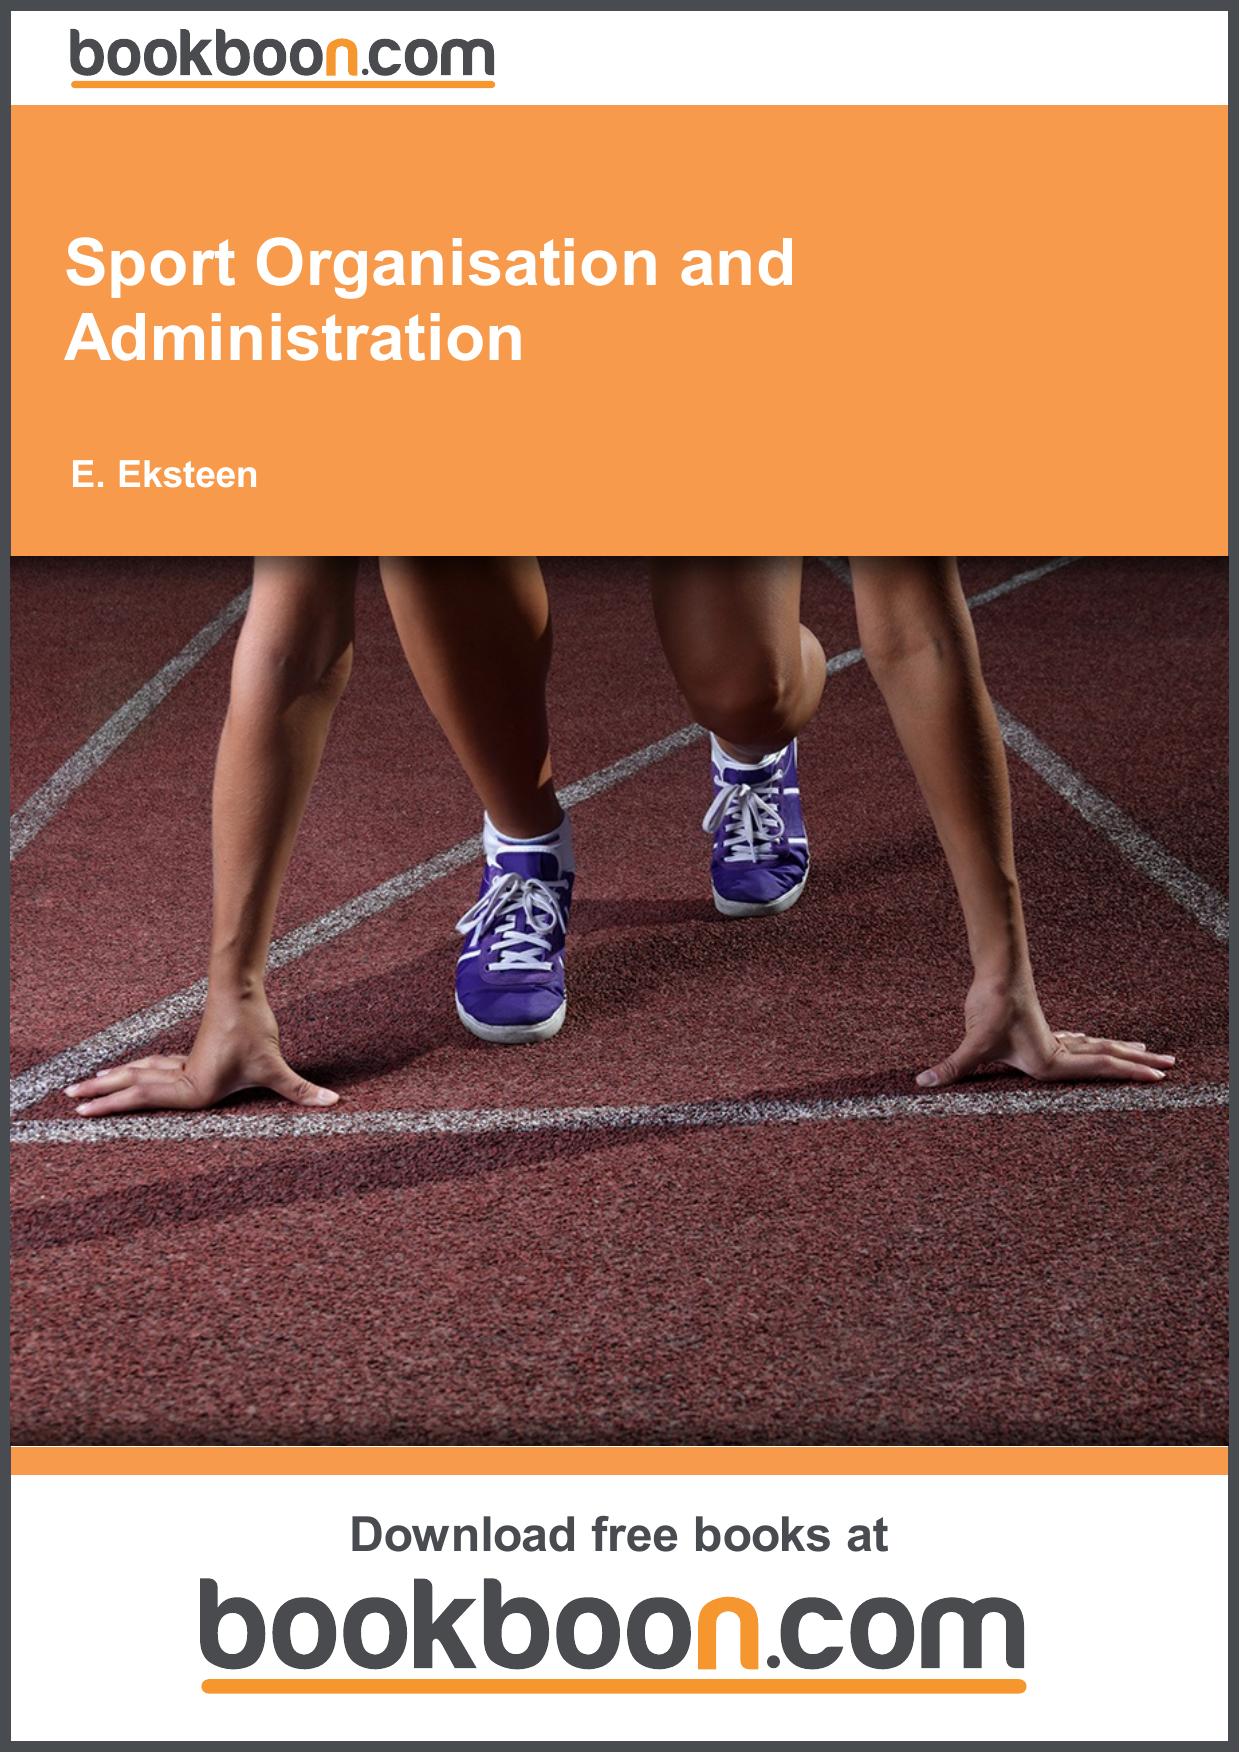 Sport-Organisation-and-Administration- 2014